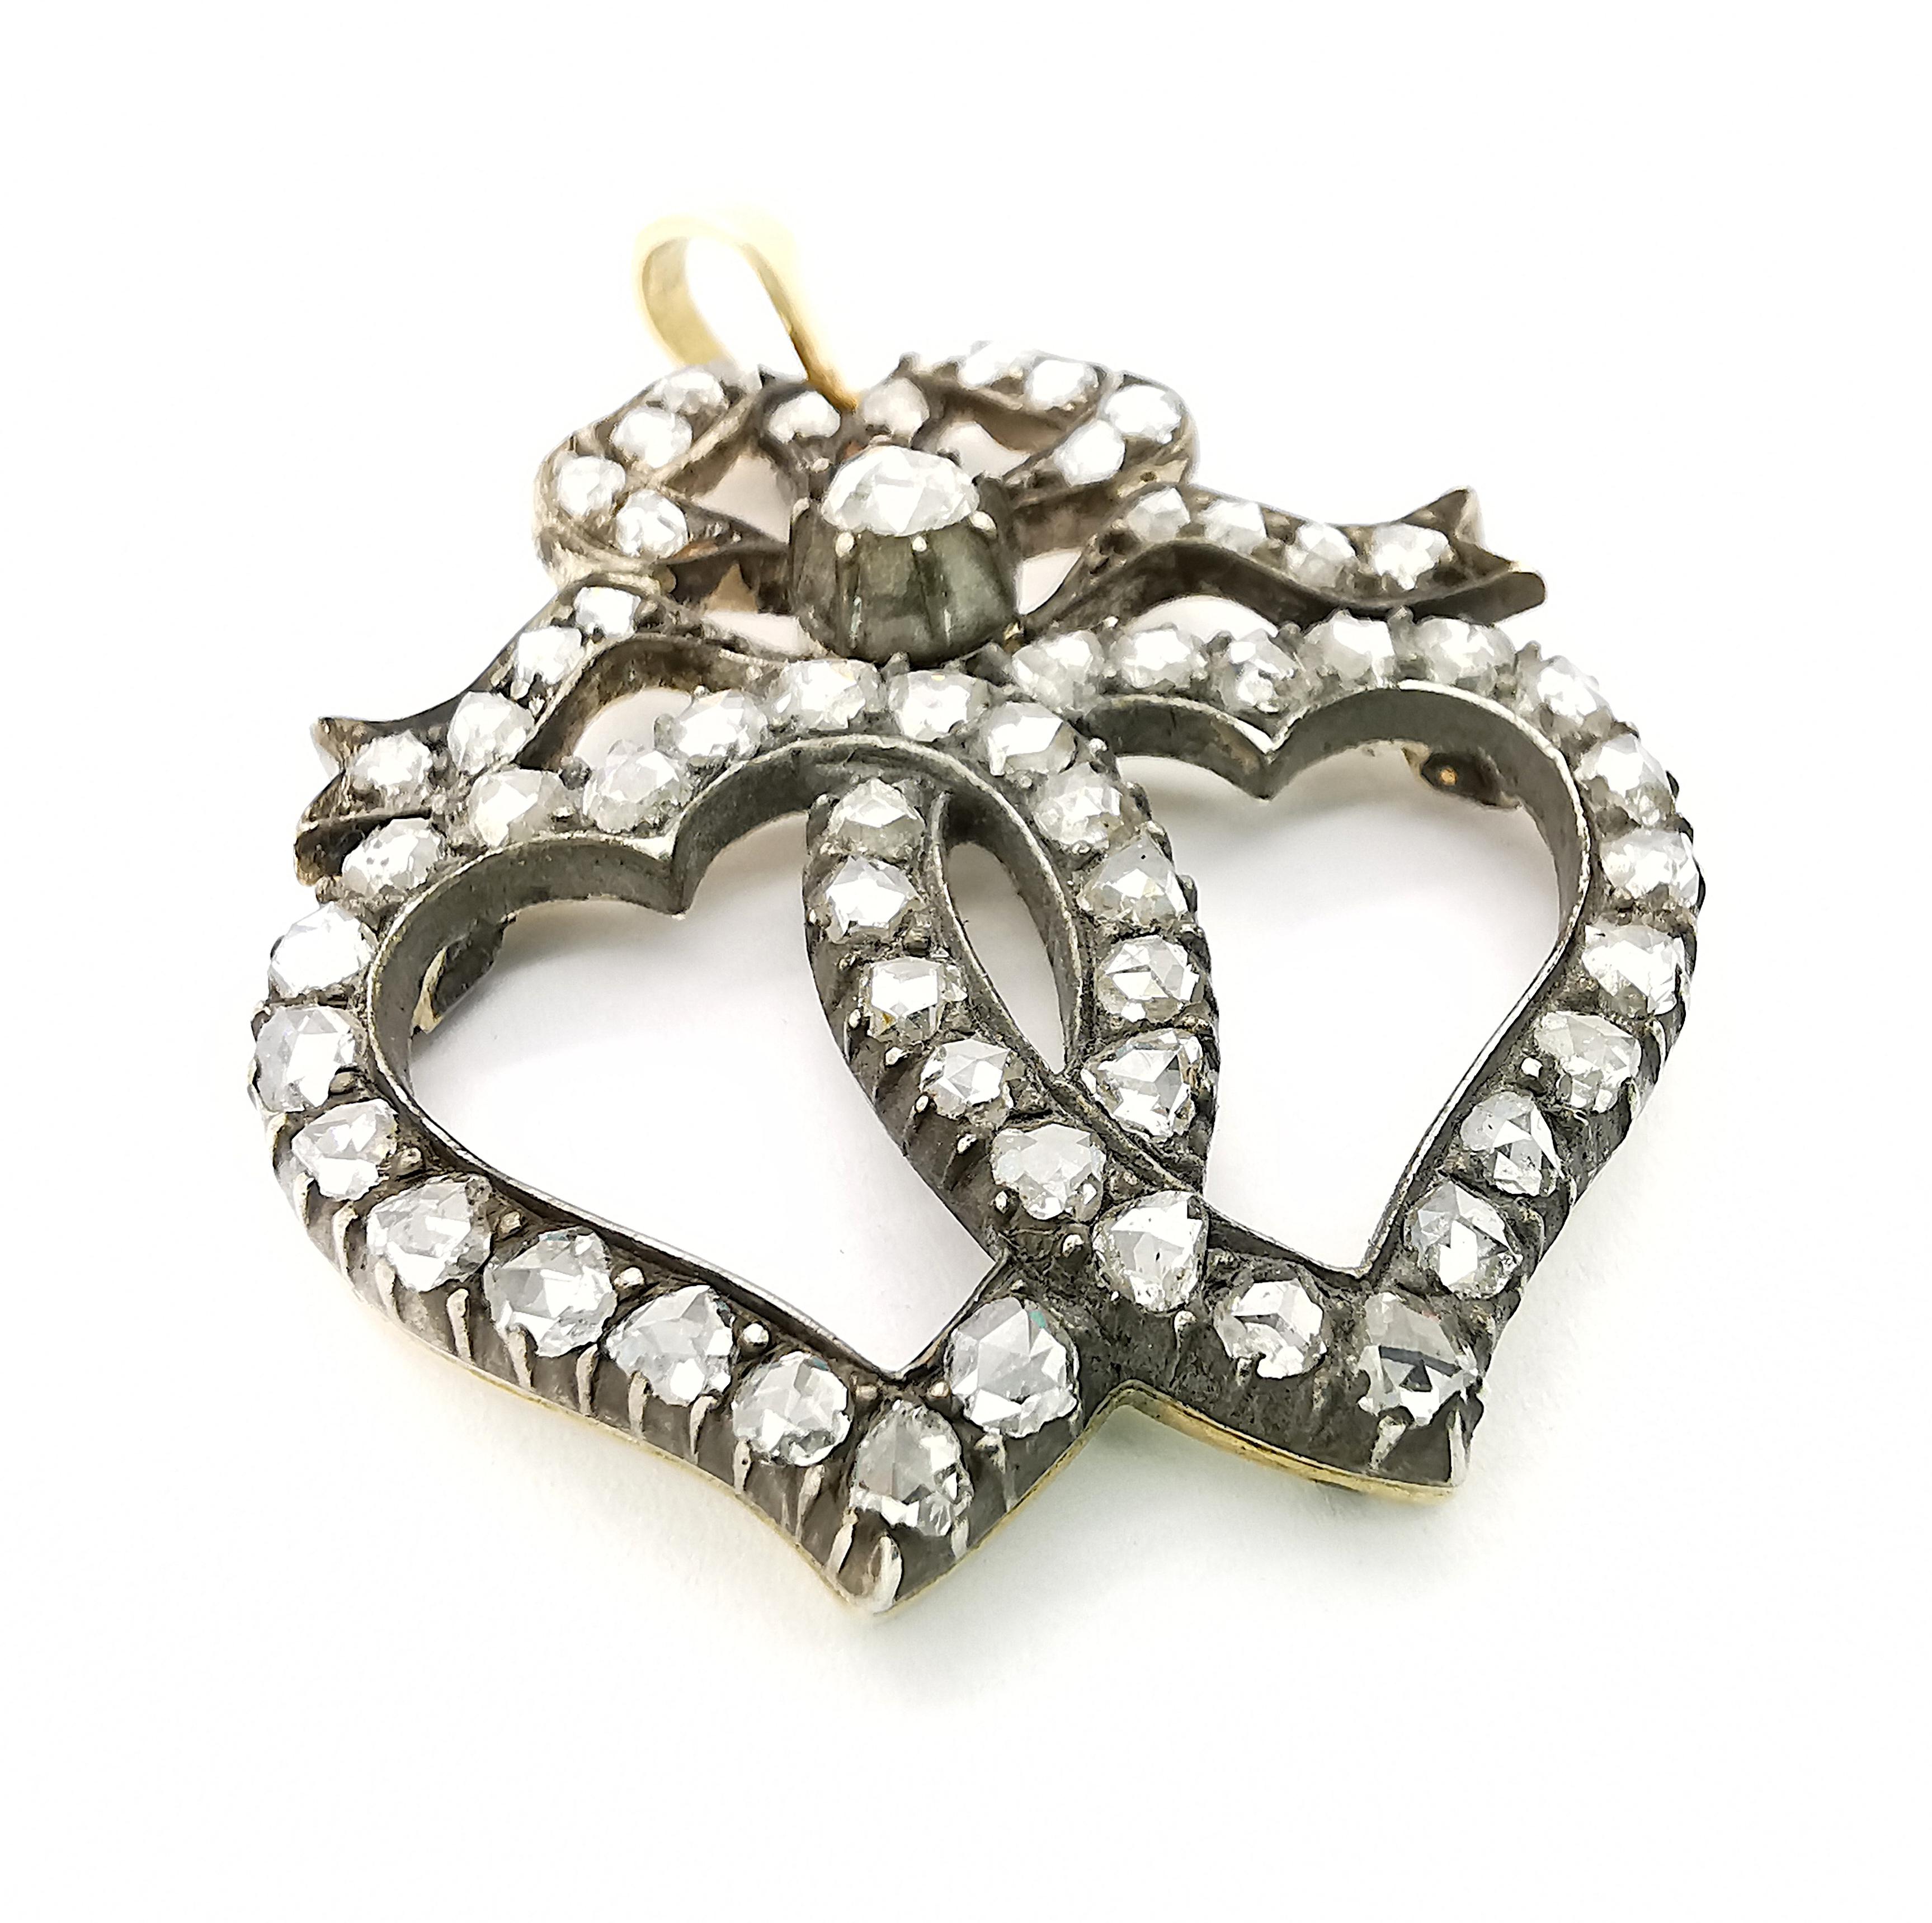 A Victorian diamond set, Luckenbooth double witches' heart pendant, with rose cut diamonds set in the two hearts and bow, weighing an estimated total of 1.50ct, in grain and cut down settings, mounted in silver-upon-gold. Circa 1880.

Luckenbooth